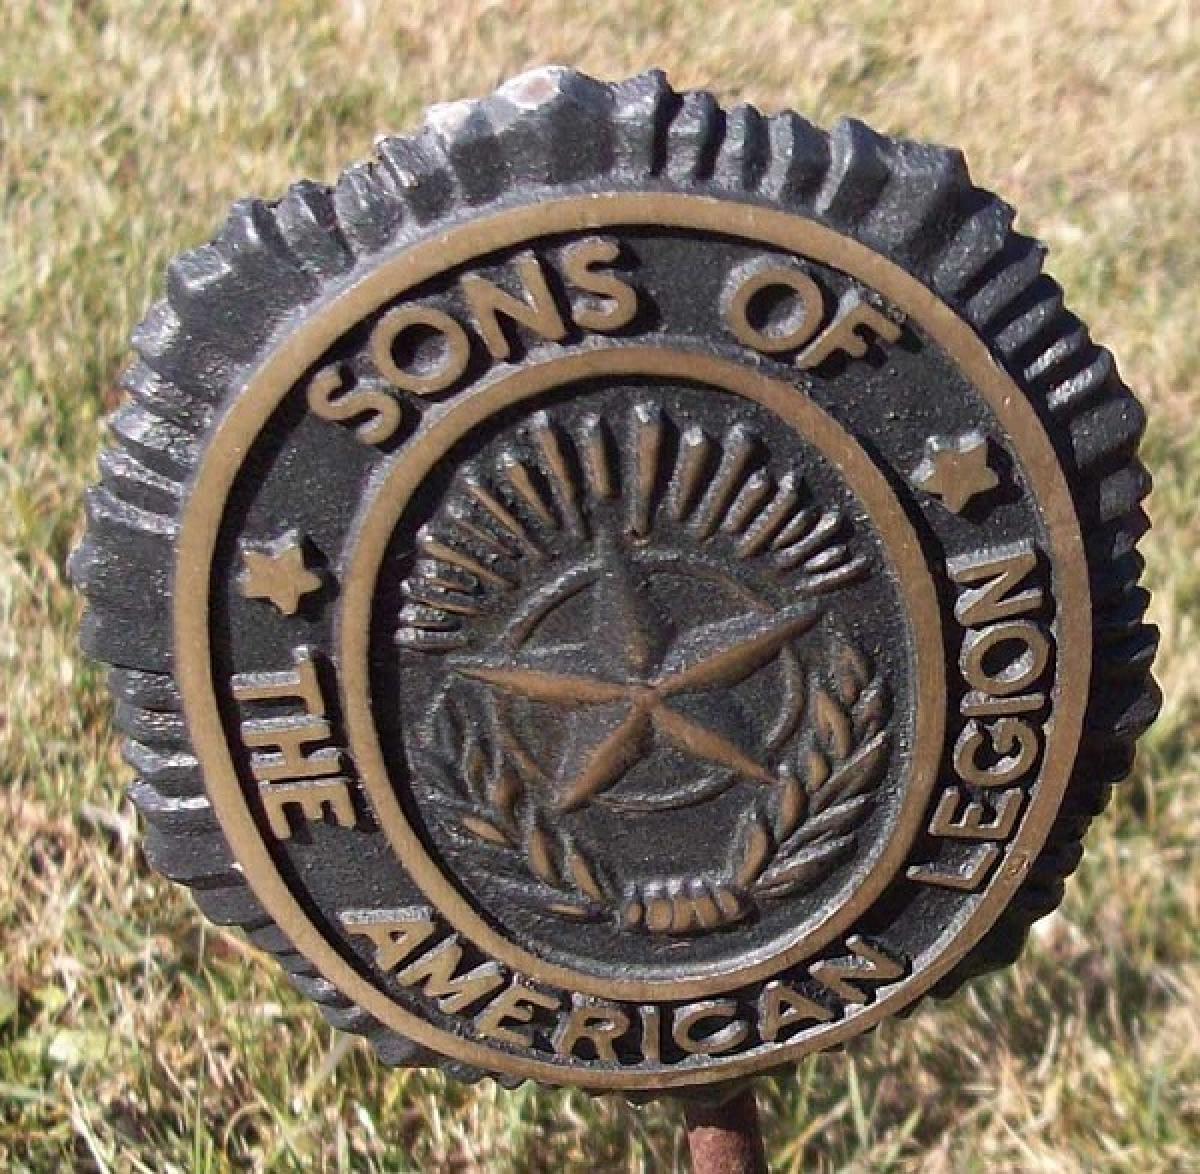 OK, Grove, Headstone Symbols and Meanings, Sons of the American Legion (SAL)